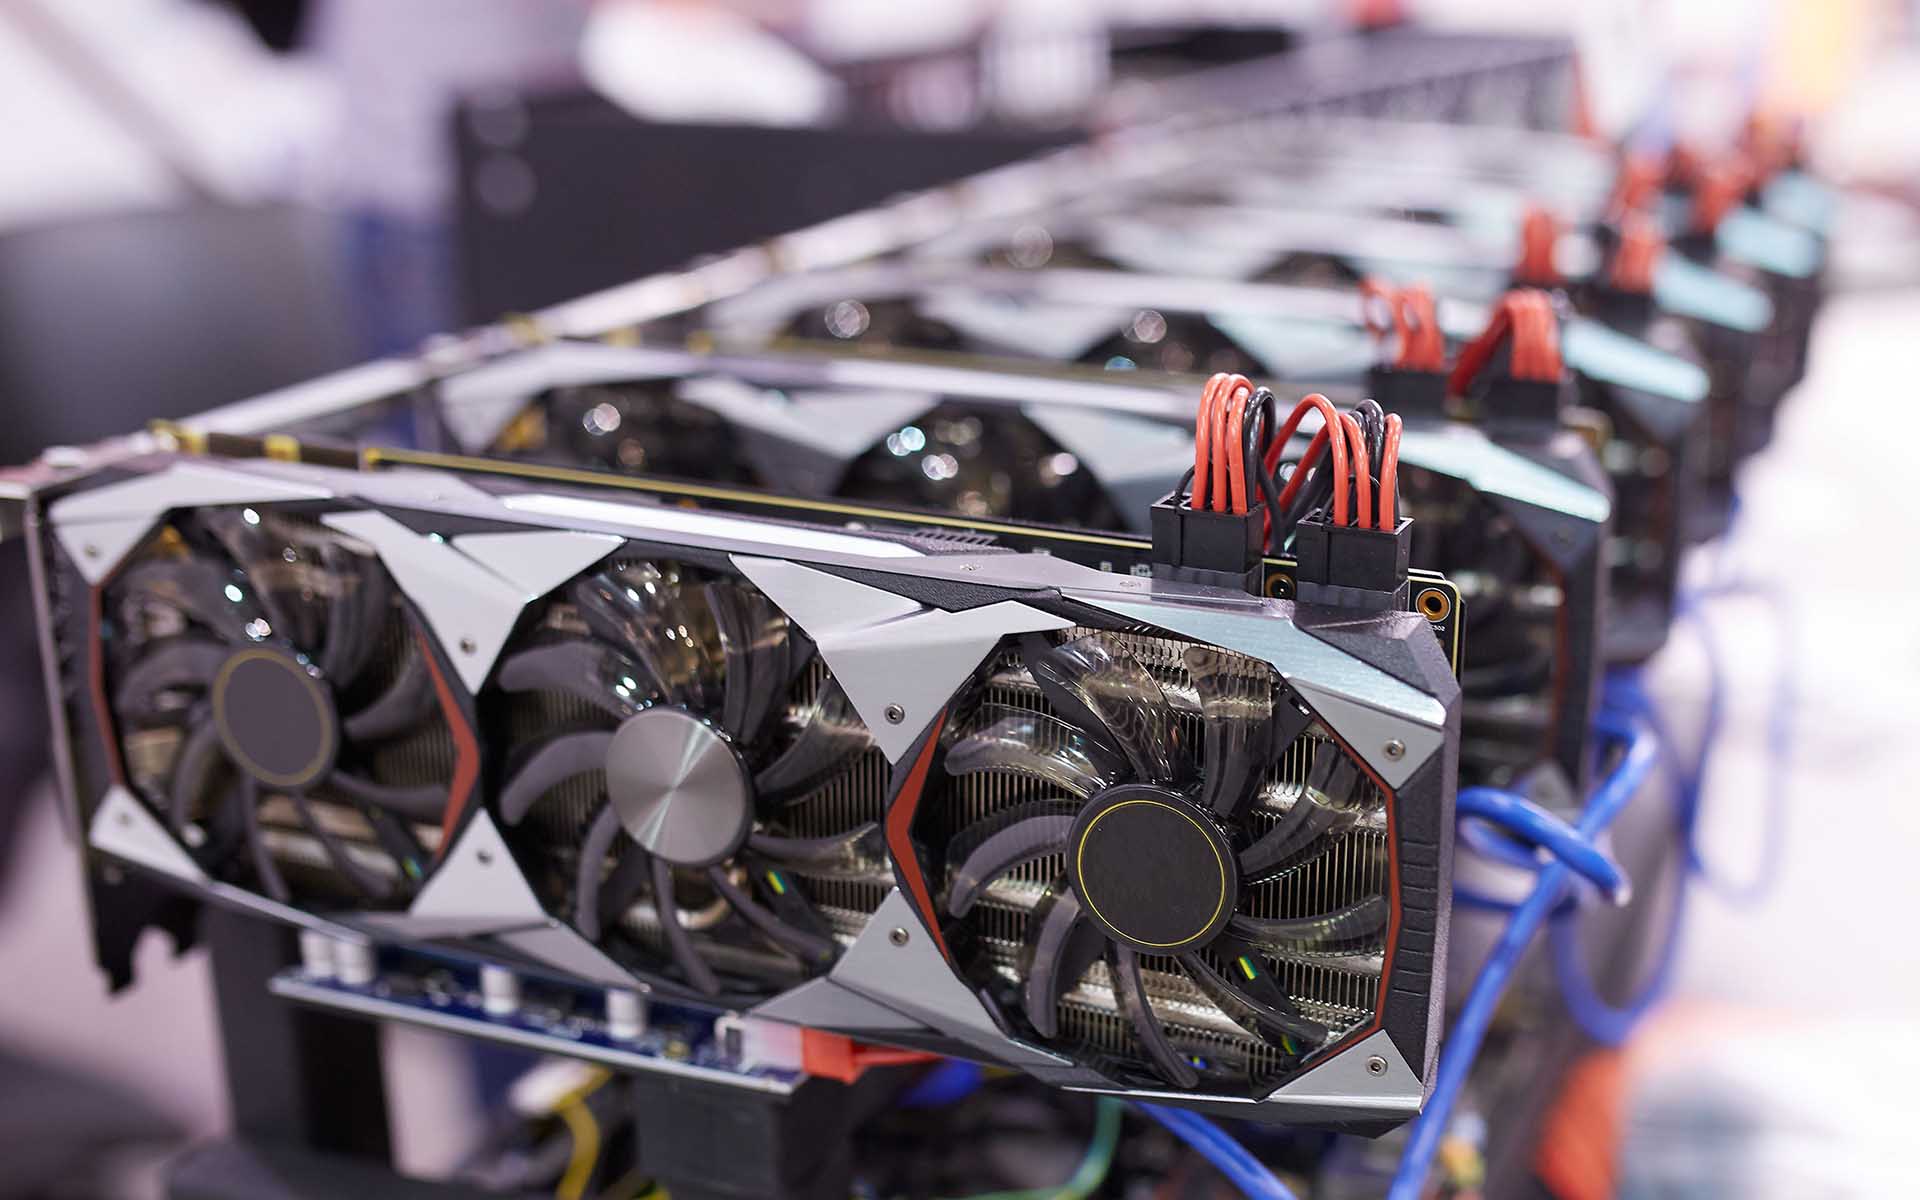 how to determine if a gpu has been used in mining or not - appuals.com